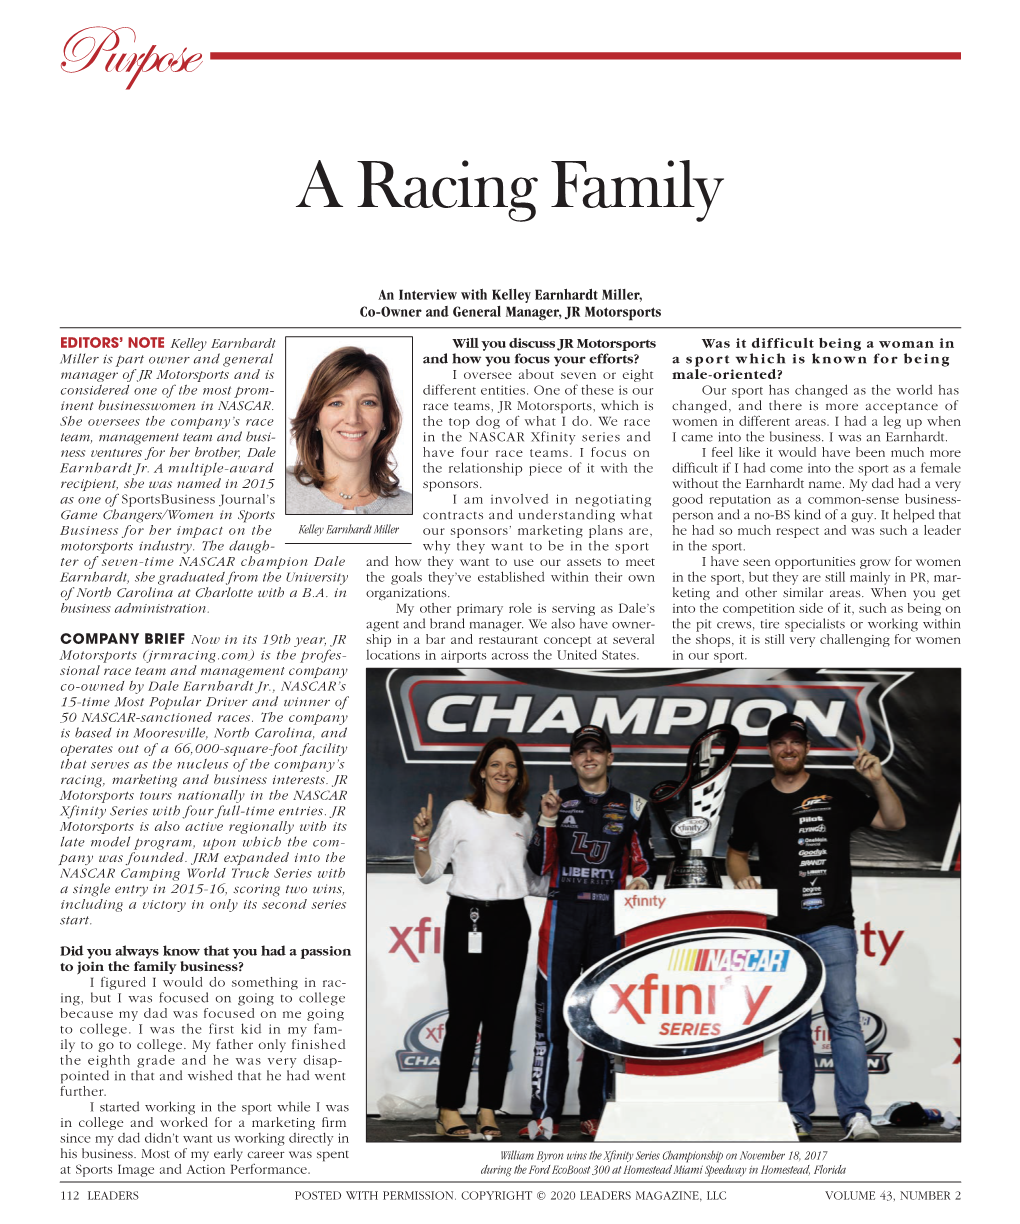 To Download a PDF of an Interview with Kelley Earnhardt Miller, Co